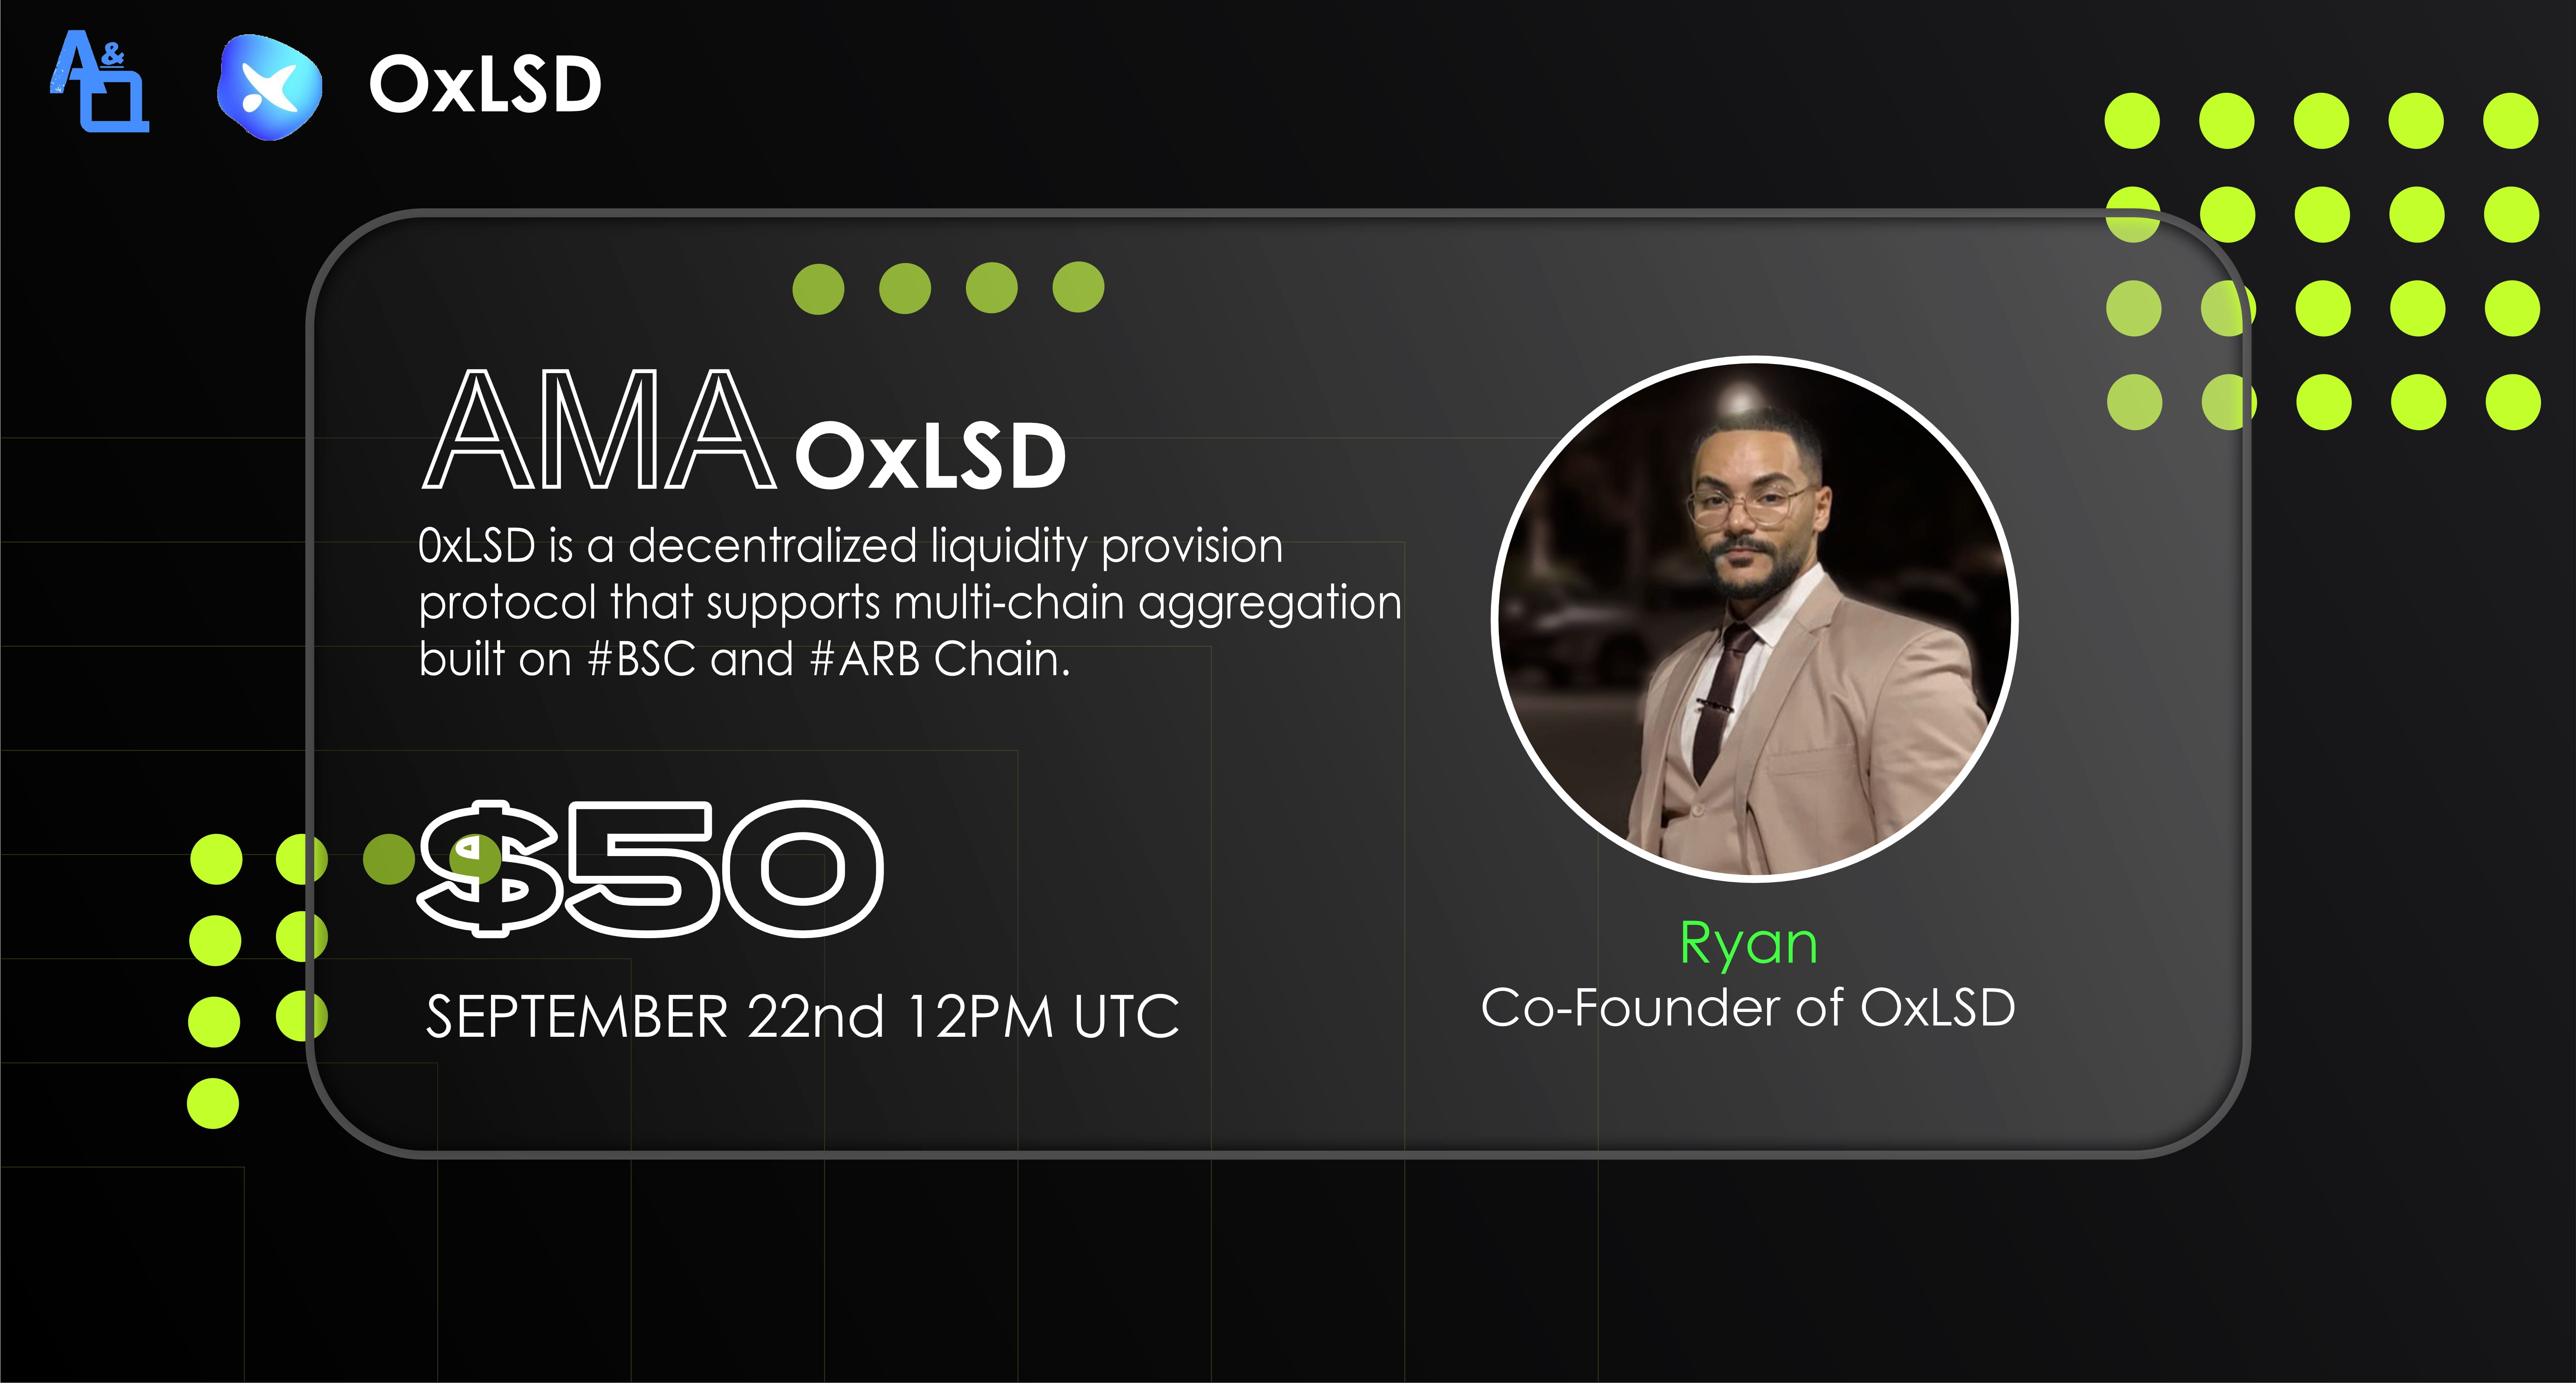 AMA A&Q on With 0xlsd | Join to win $50